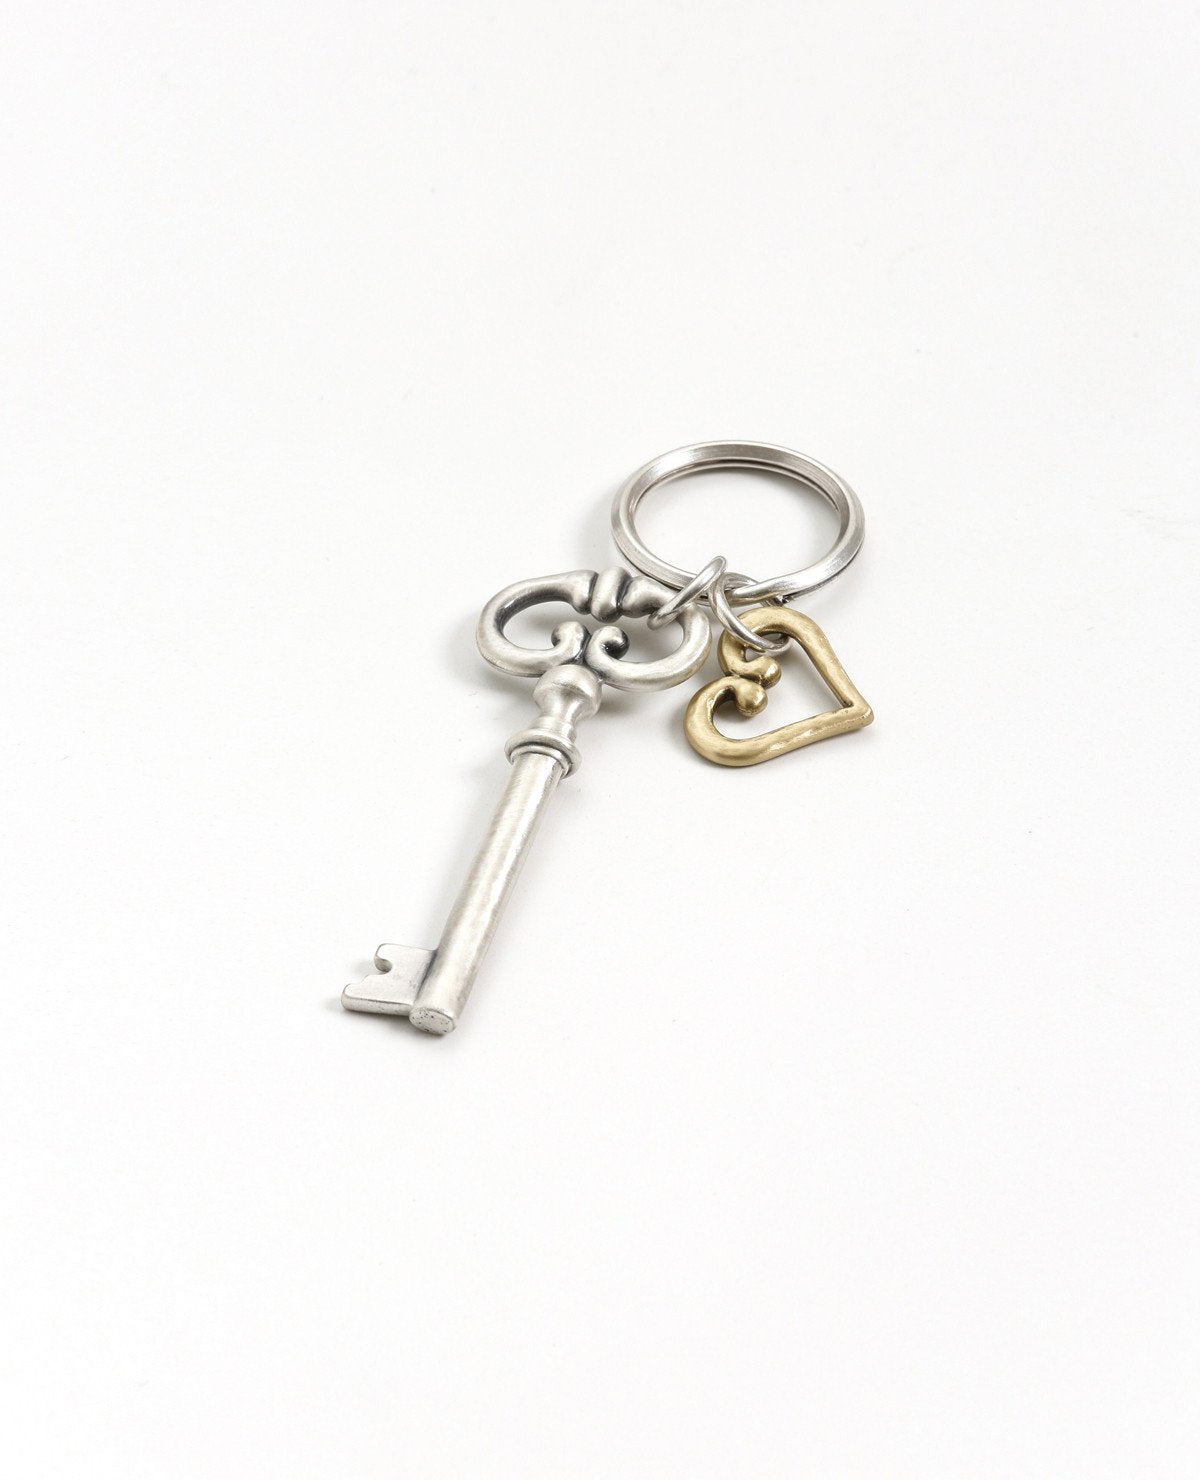 The key to the heart - because hearts and keys have gone together since the beginning of time. A charming and exciting keychain, the key is coated in sterling silver and has a classic design. The heart hangs next to the key, coated in golden brass. The keyring is strong and reliable. This is a timeless and classic present, suitable for any man or woman, in any occasion you wish to grant the gift of love.  Length: 10 cm  Width: 3 cm